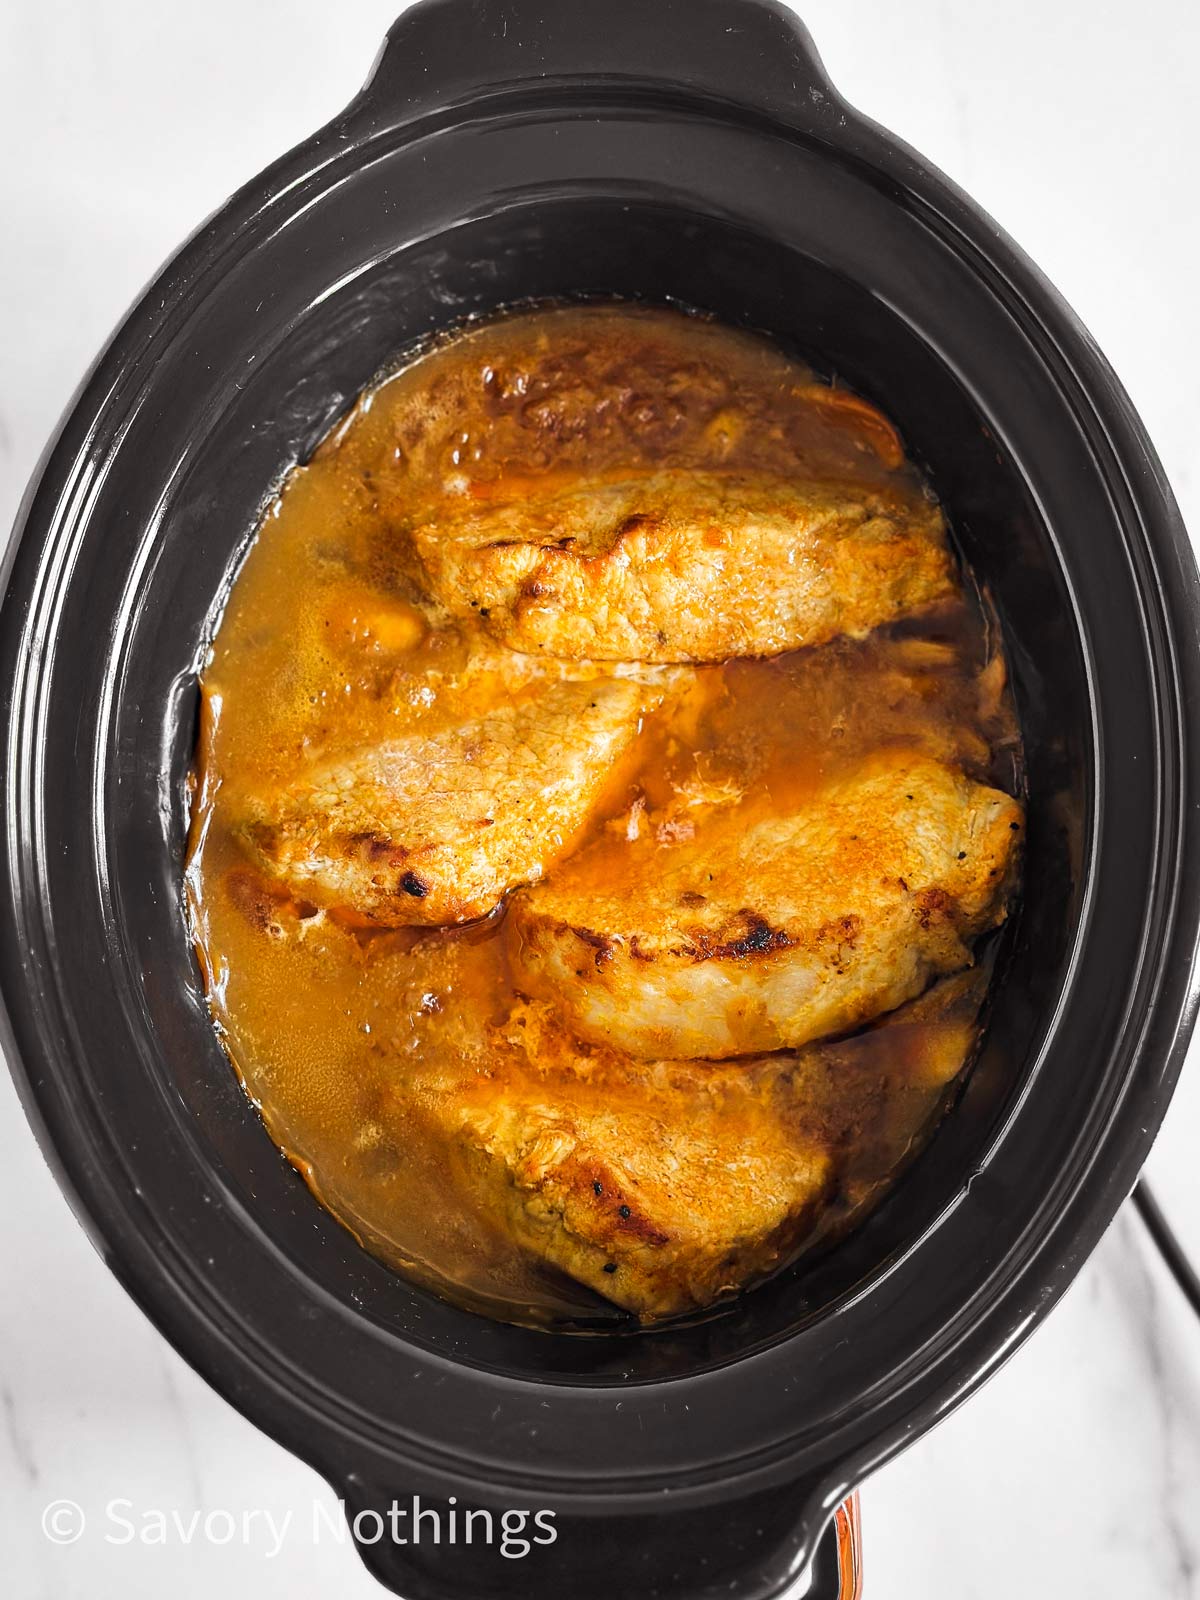 overhead view of cooked pork chops and gravy in black slow cooker crock